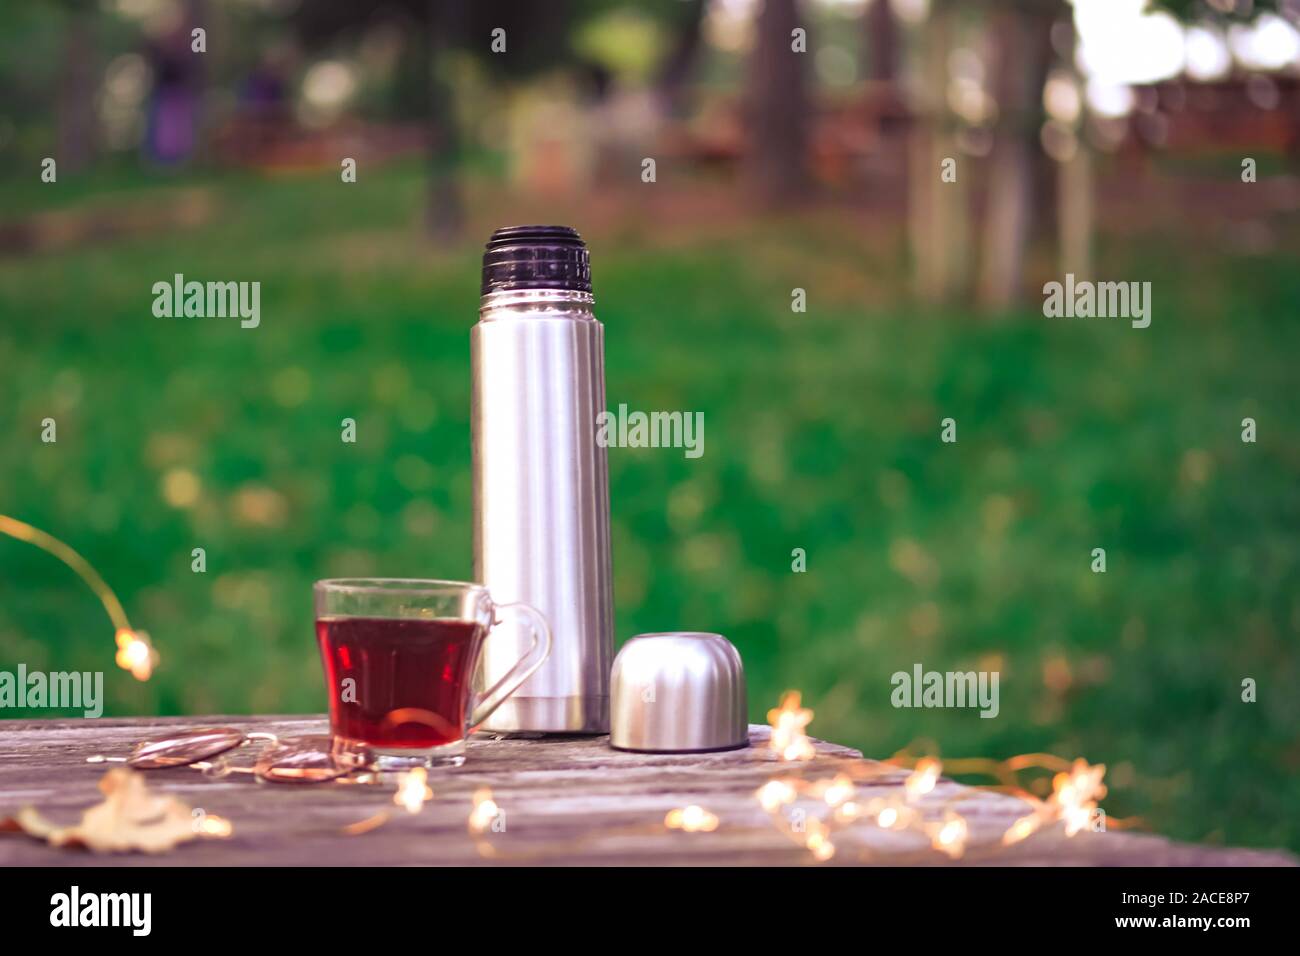 https://c8.alamy.com/comp/2ACE8P7/cozy-autumn-tea-break-with-a-cup-of-tea-thermos-flasksunglasses-and-dry-autumn-leaves-on-old-vintage-wooden-table-top-down-view-2ACE8P7.jpg